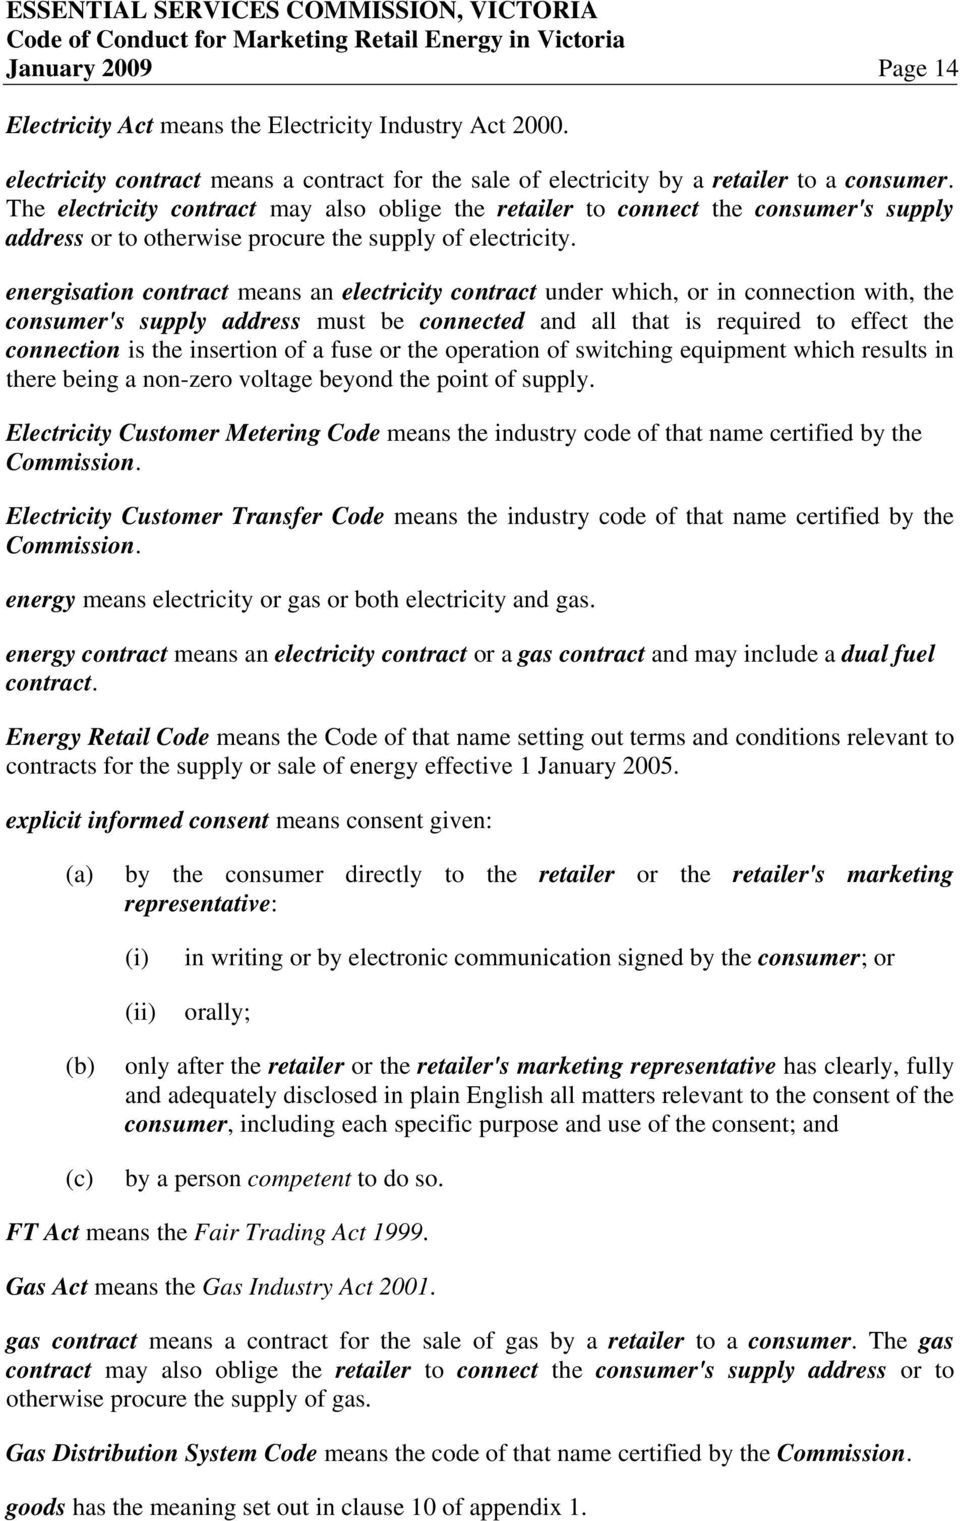 energisation contract means an electricity contract under which, or in connection with, the consumer's supply address must be connected and all that is required to effect the connection is the